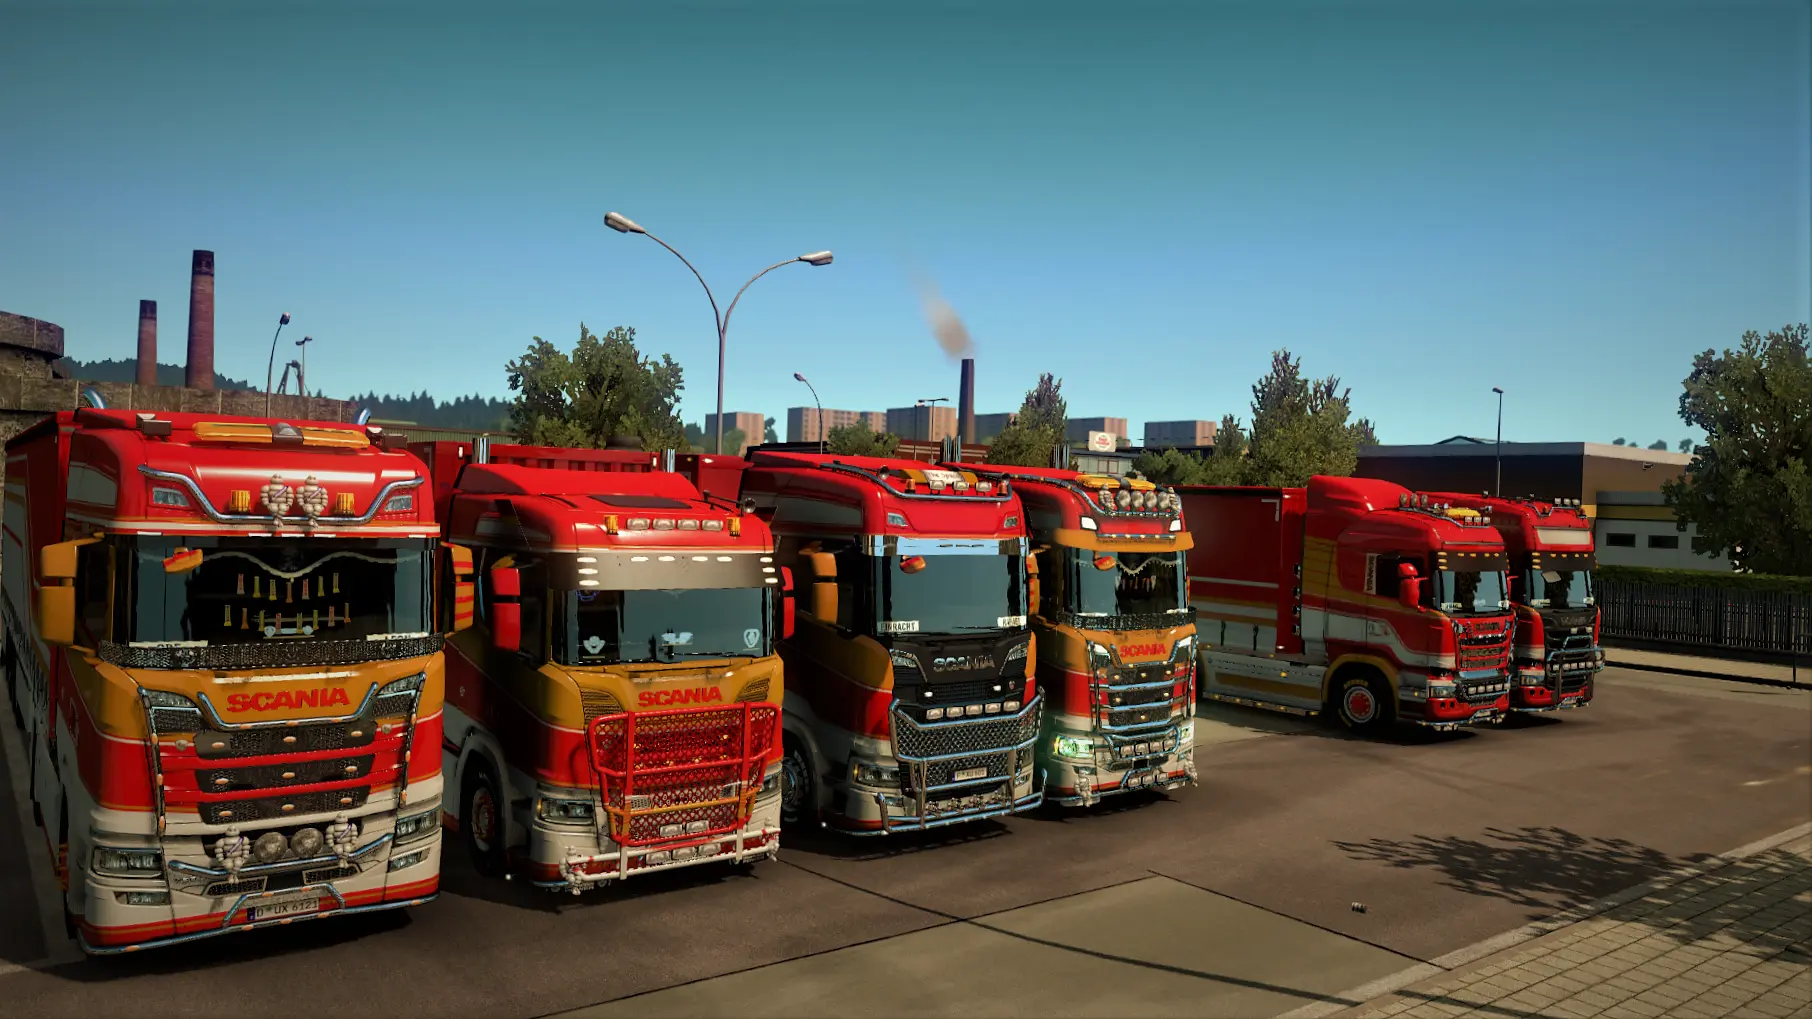 A line of parked GPE trucks all wearing the new red & gold livery